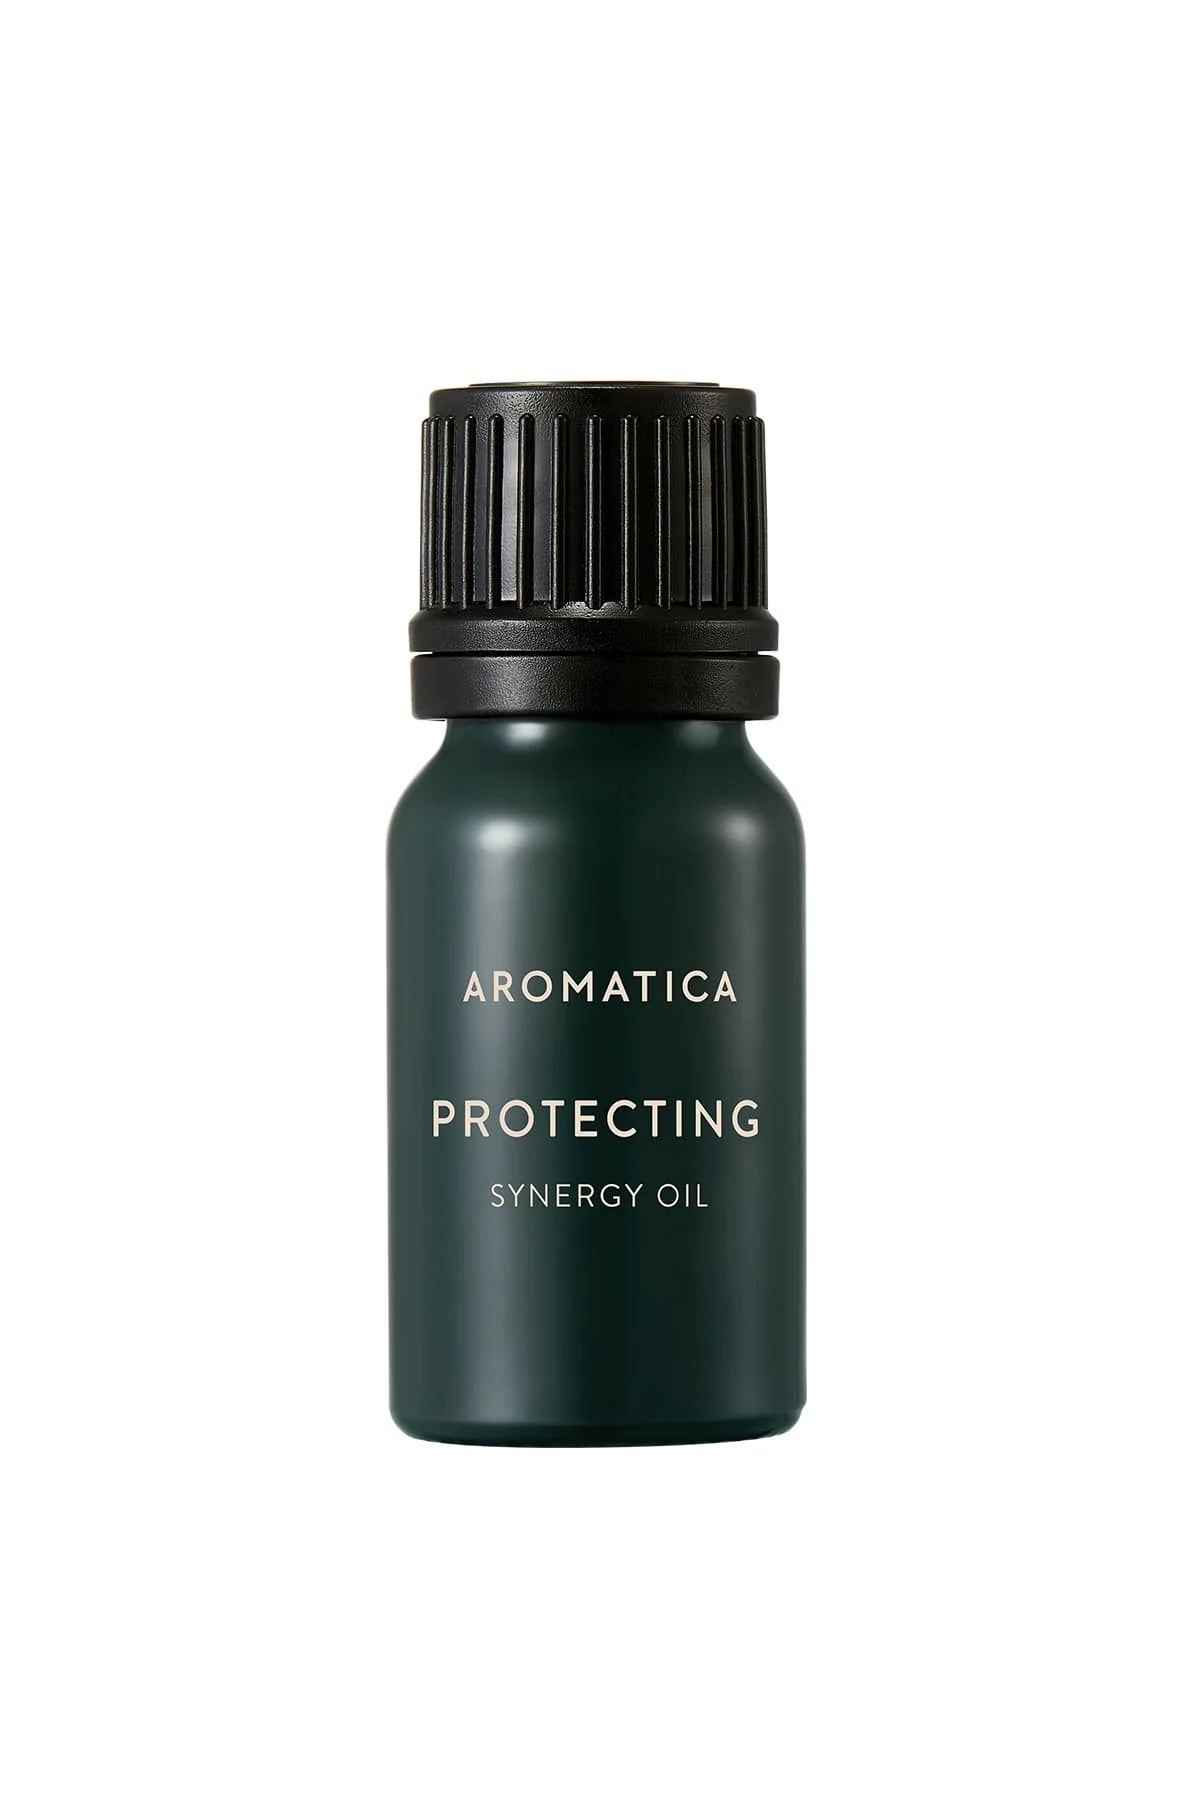 Aromatica Protecting Synergy Oil